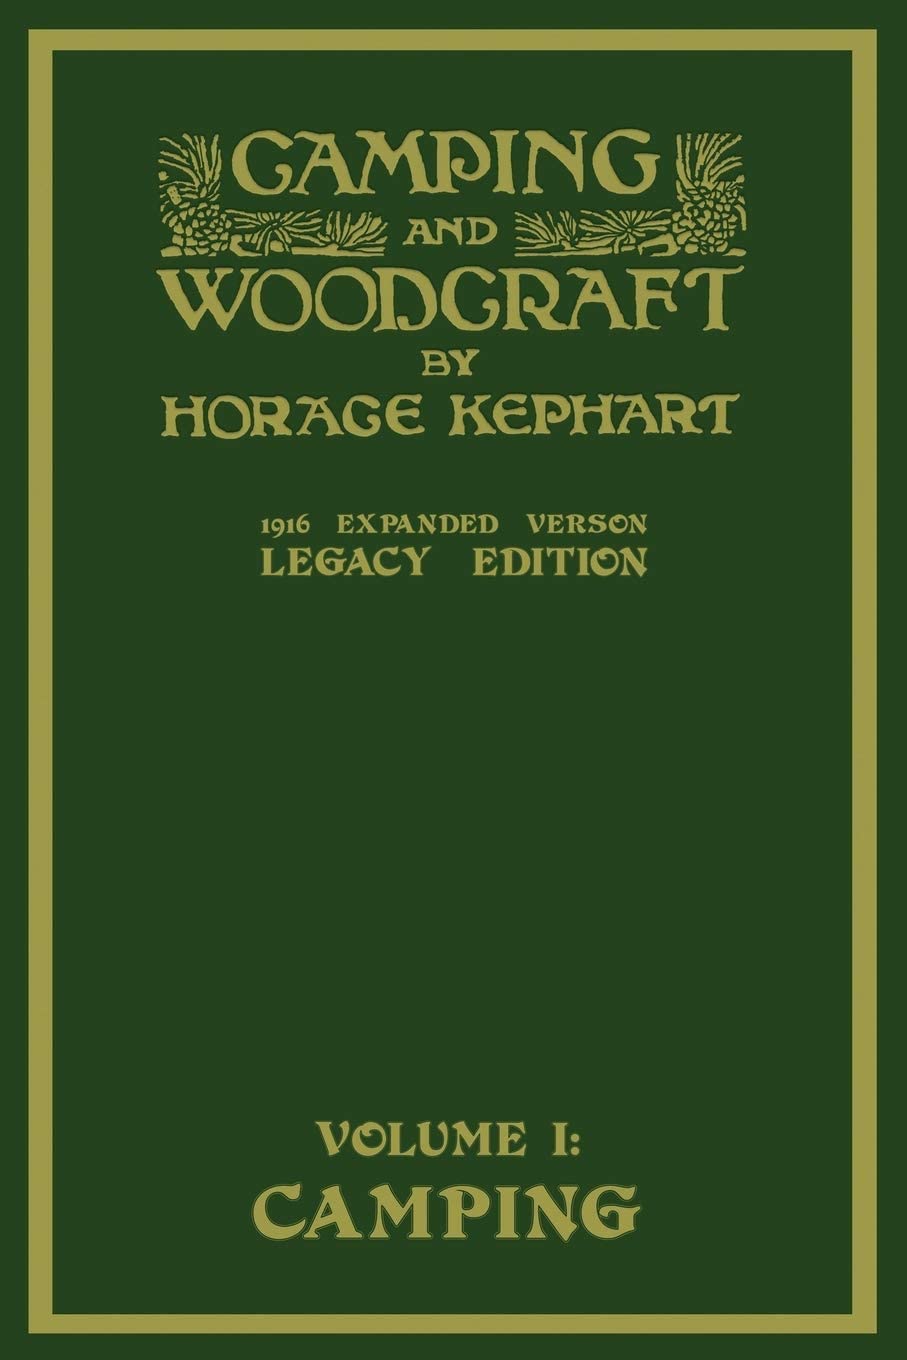 Camping And Woodcraft Volume 1 - The Expanded 1916 Version (Legacy Edition): The Deluxe Masterpiece On Outdoors Living And Wilderness Travel (Library of American Outdoors Classics)